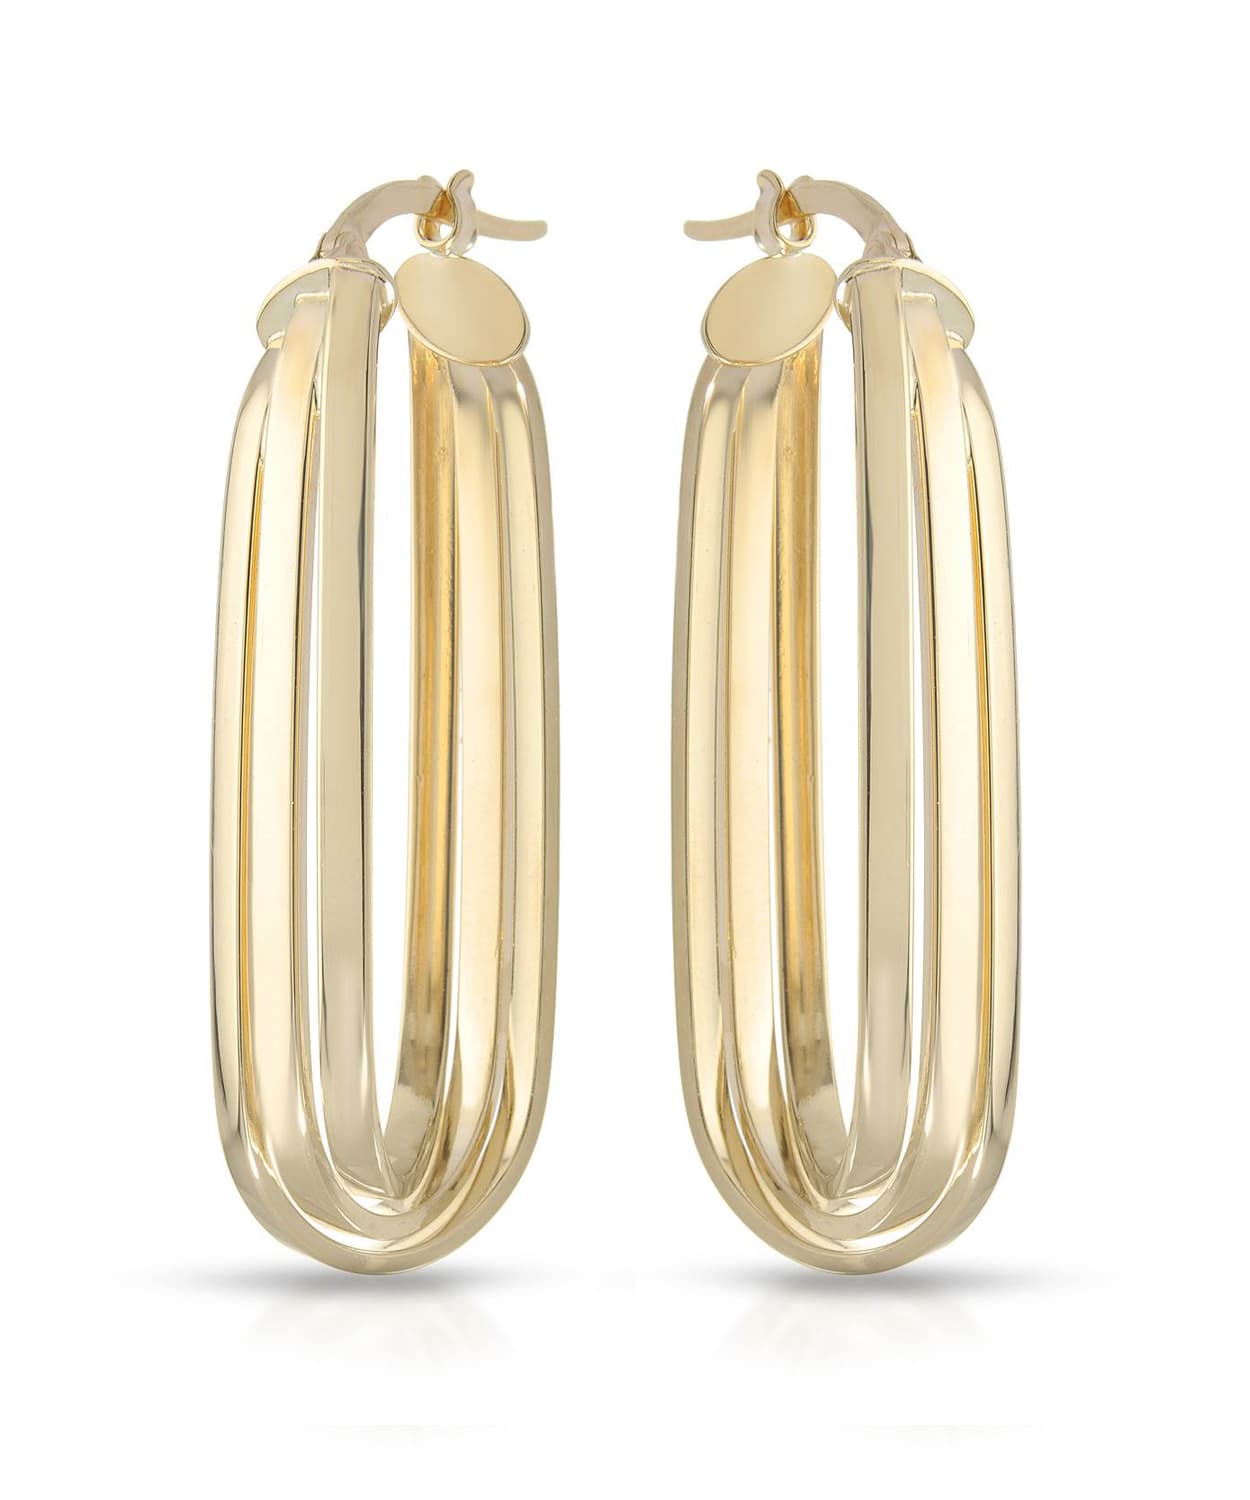 14k Yellow Gold Contemporary Hoop Earrings View 1